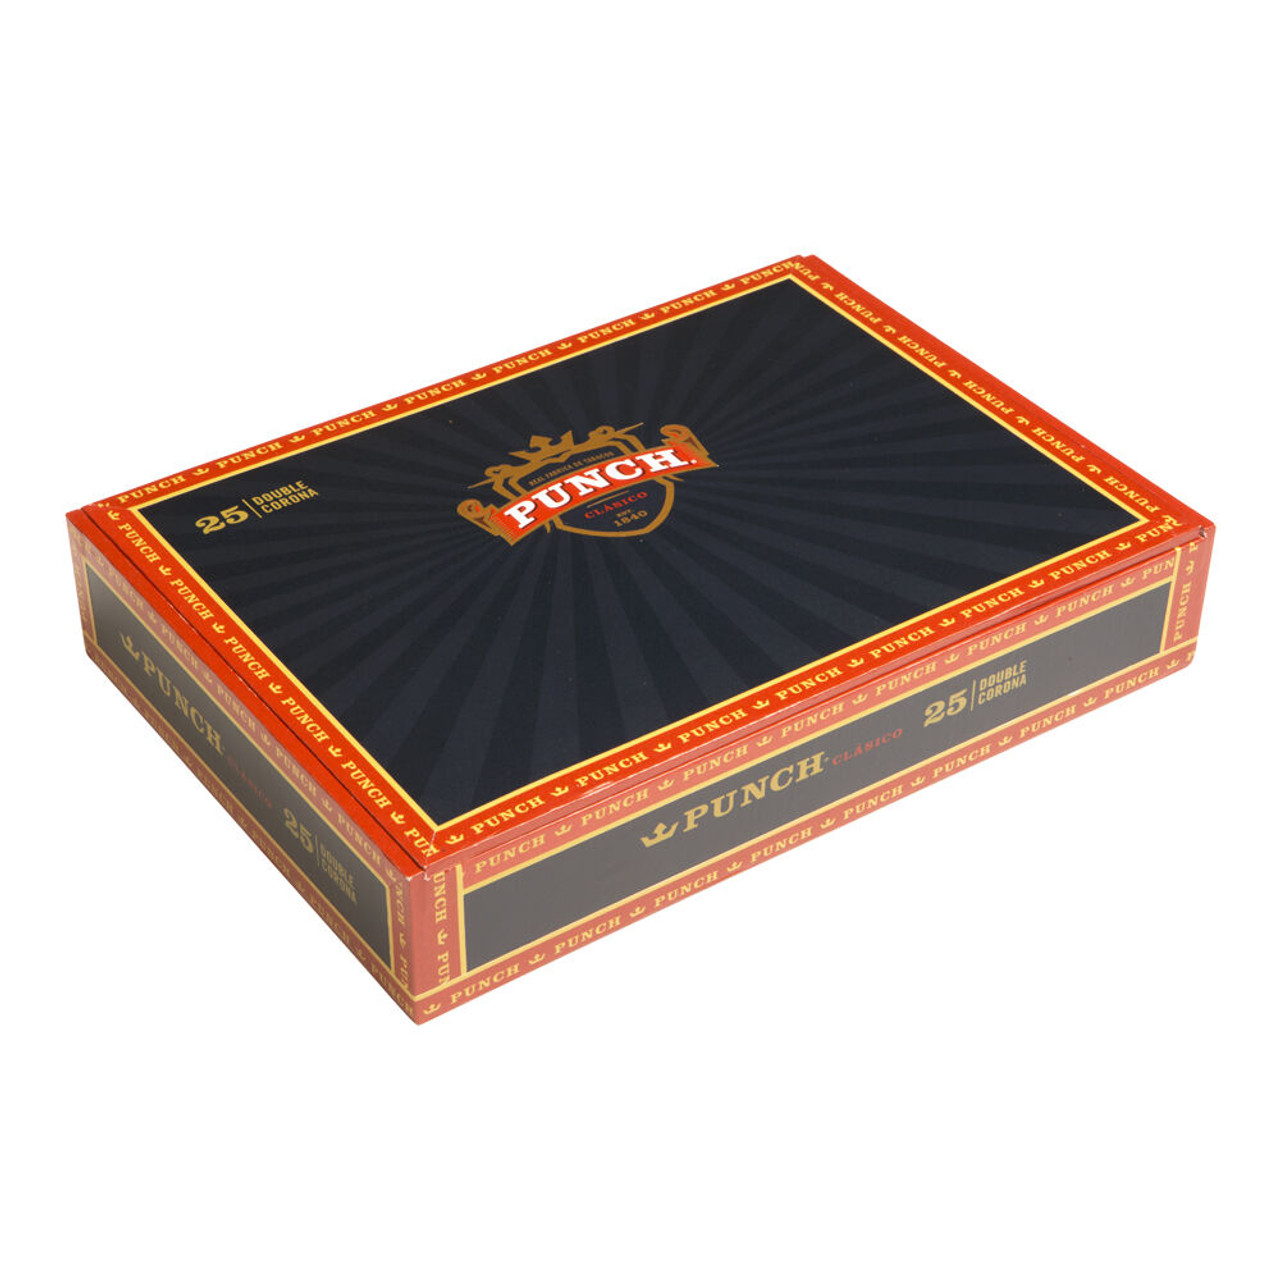 Punch After Dinner Maduro Cigars - 7.25 x 46 (Box of 25) *Box